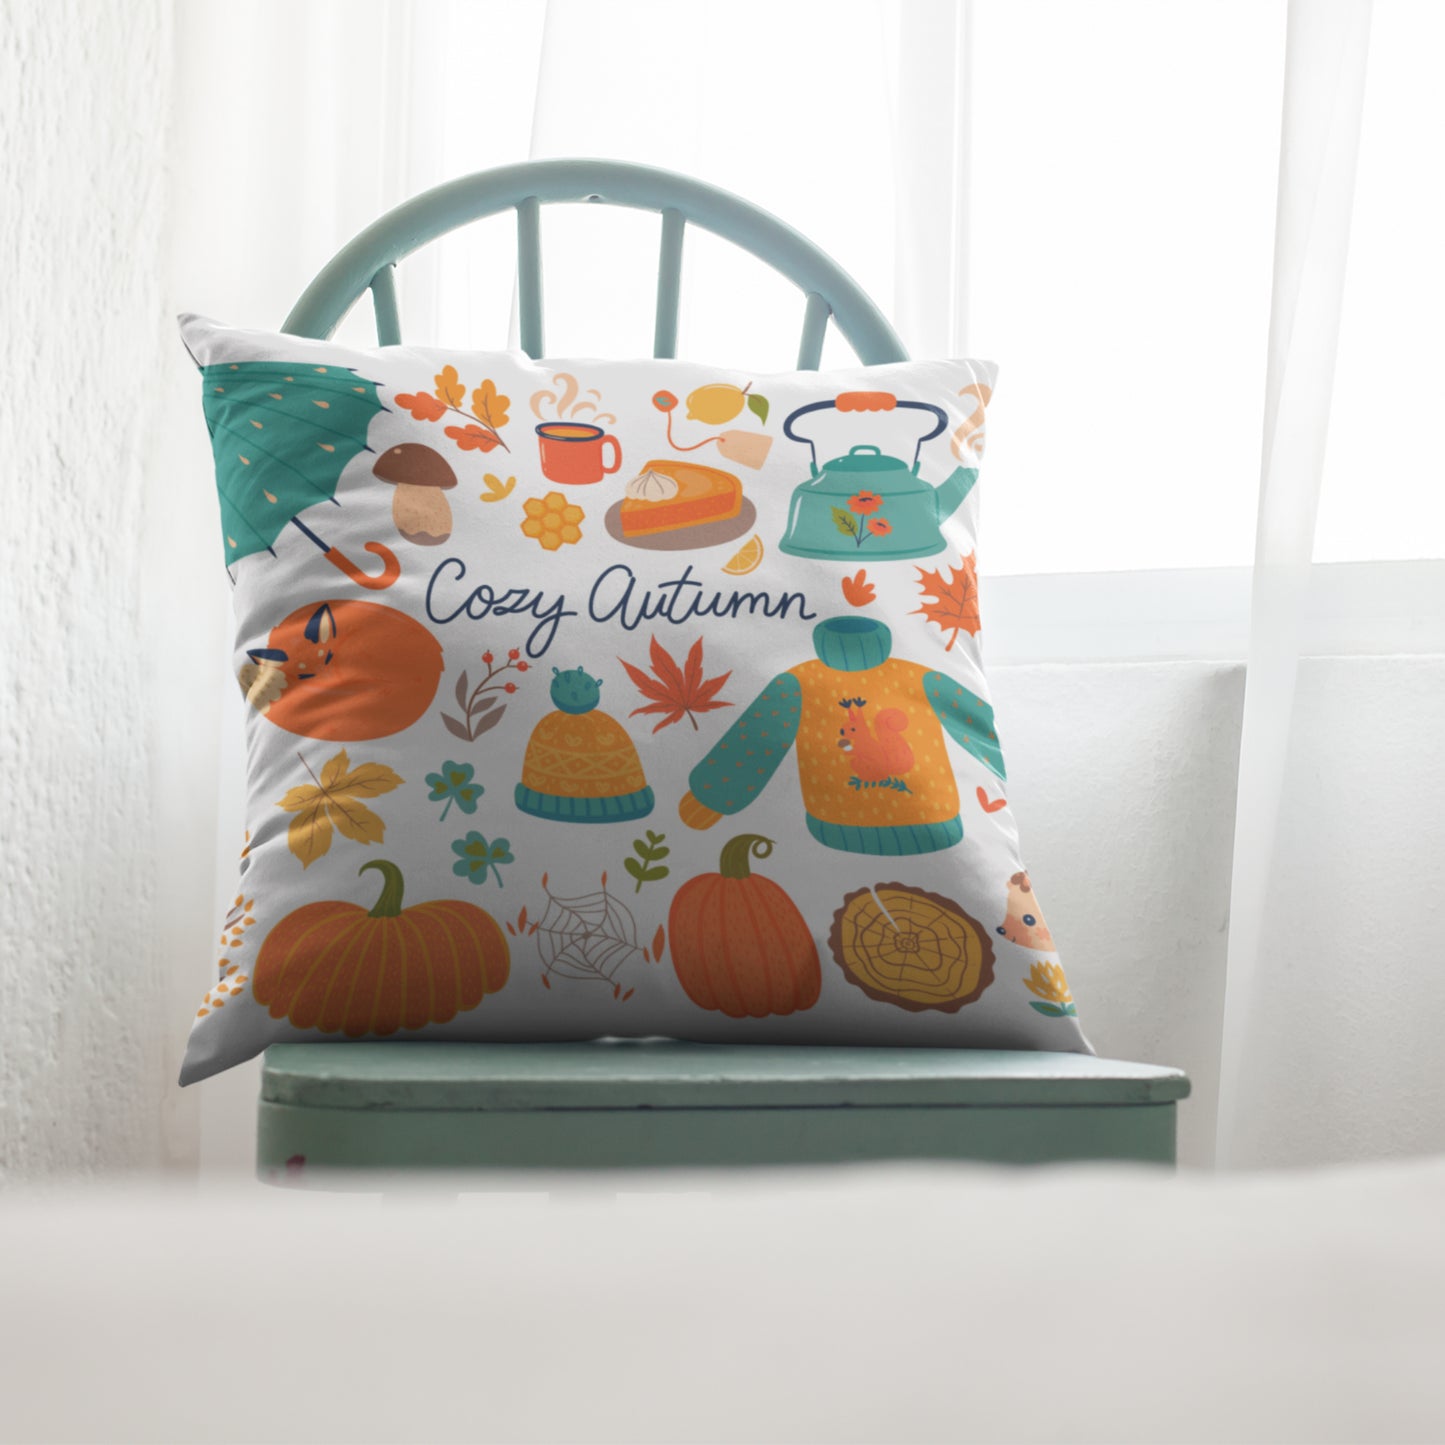 Cozy Autumn Kids Room Pillow Case, Kids Room Fall Decor Cushion Cover by Homeezone